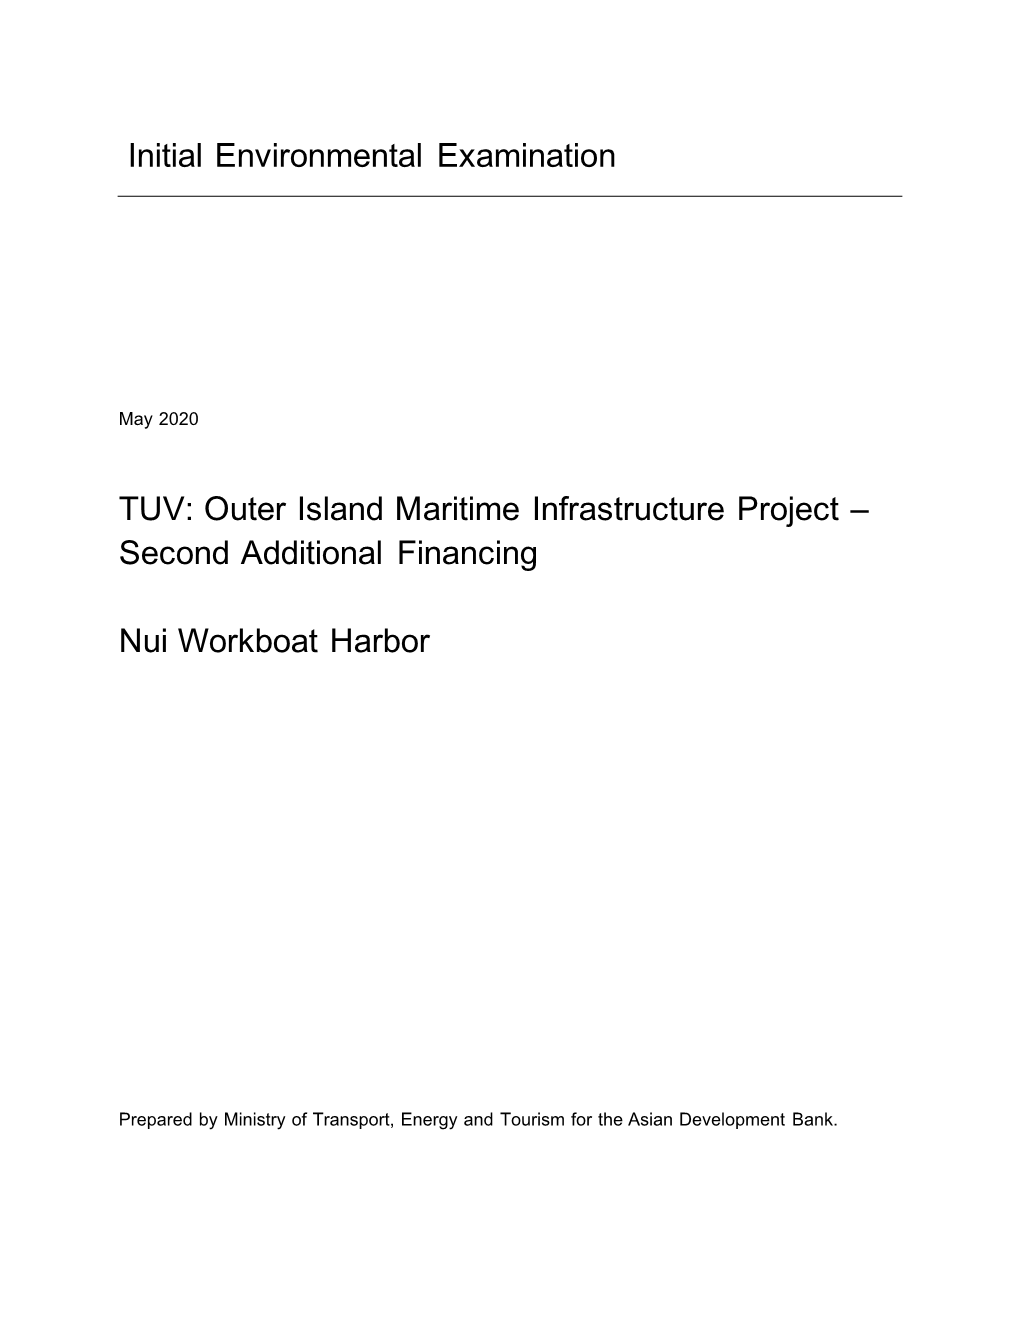 Outer Island Maritime Infrastructure Project – Second Additional Financing